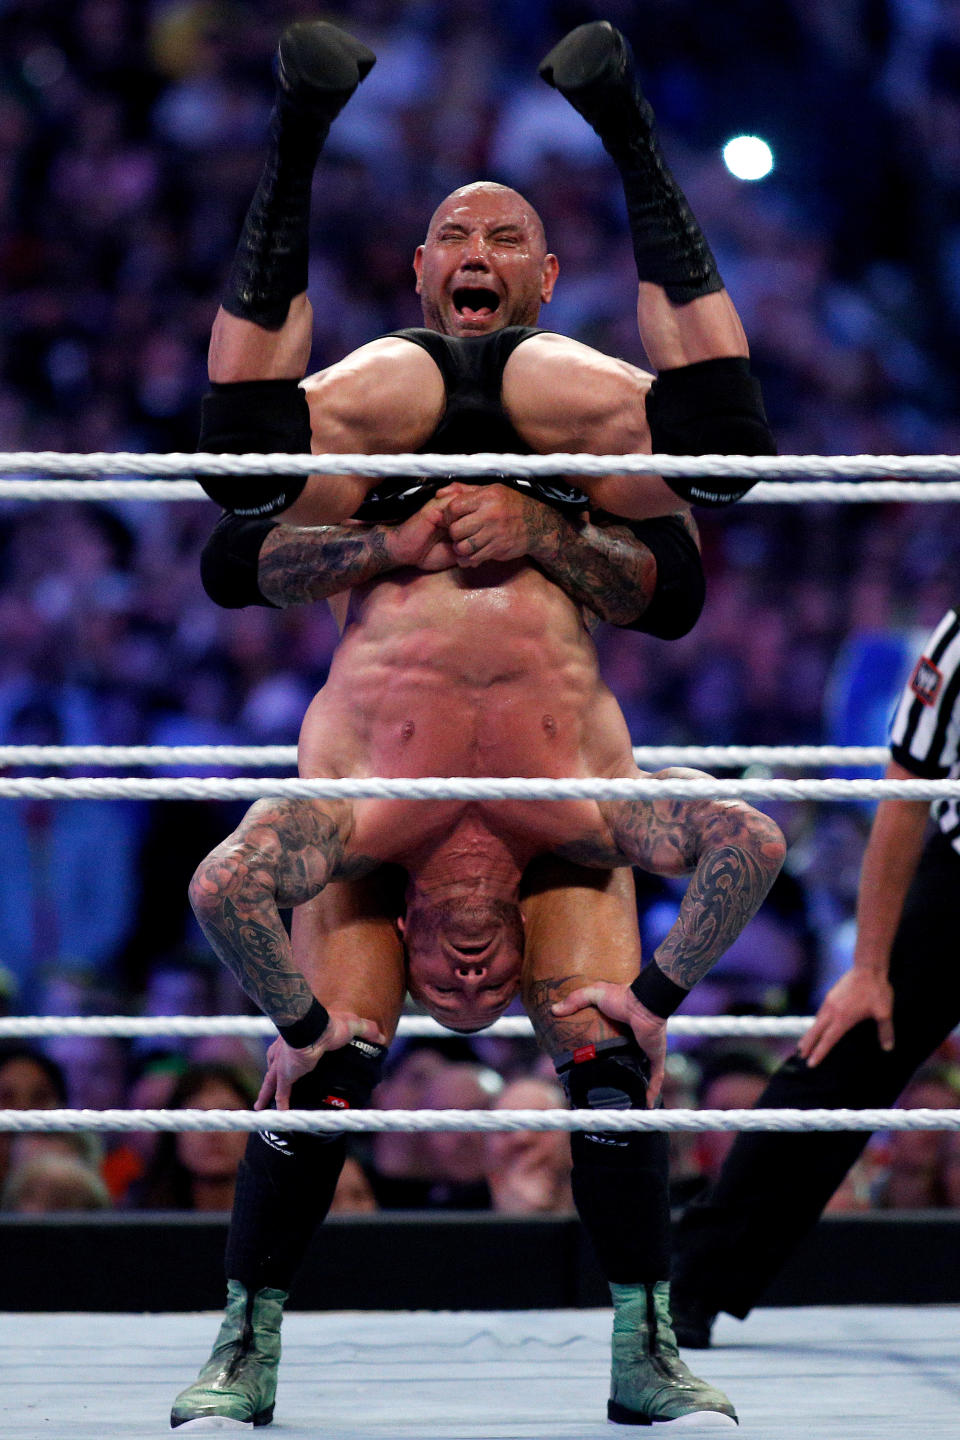 Randy Orton, bottom, and Batista, top, compete during Wrestlemania XXX at the Mercedes-Benz Super Dome in New Orleans on Sunday, April 6, 2014. (Jonathan Bachman/AP Images for WWE)